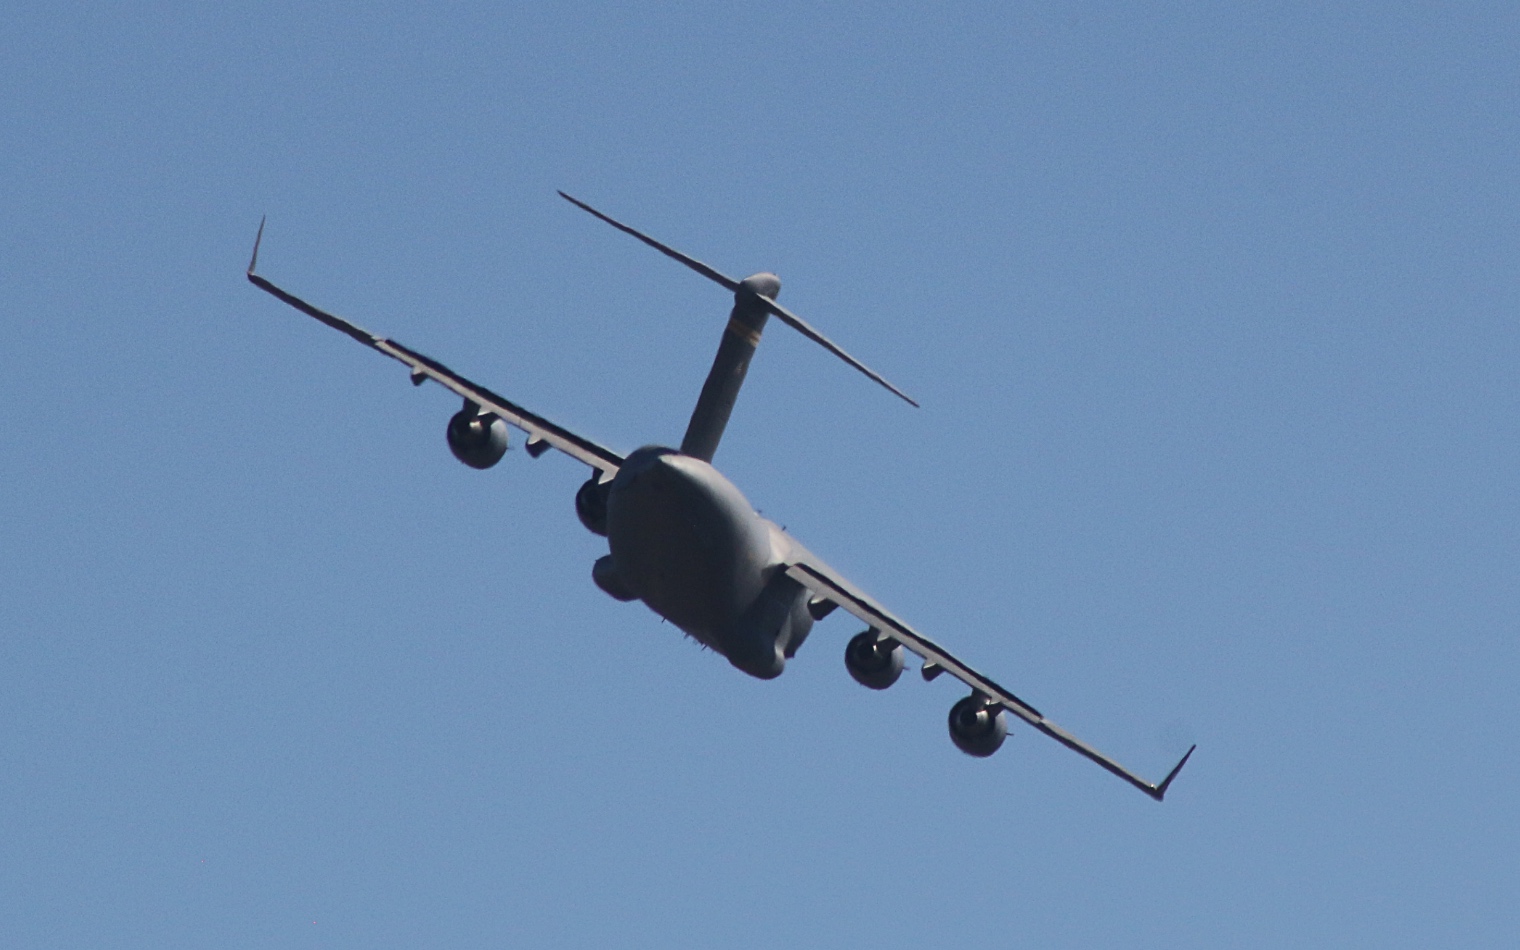 C17 from Rear